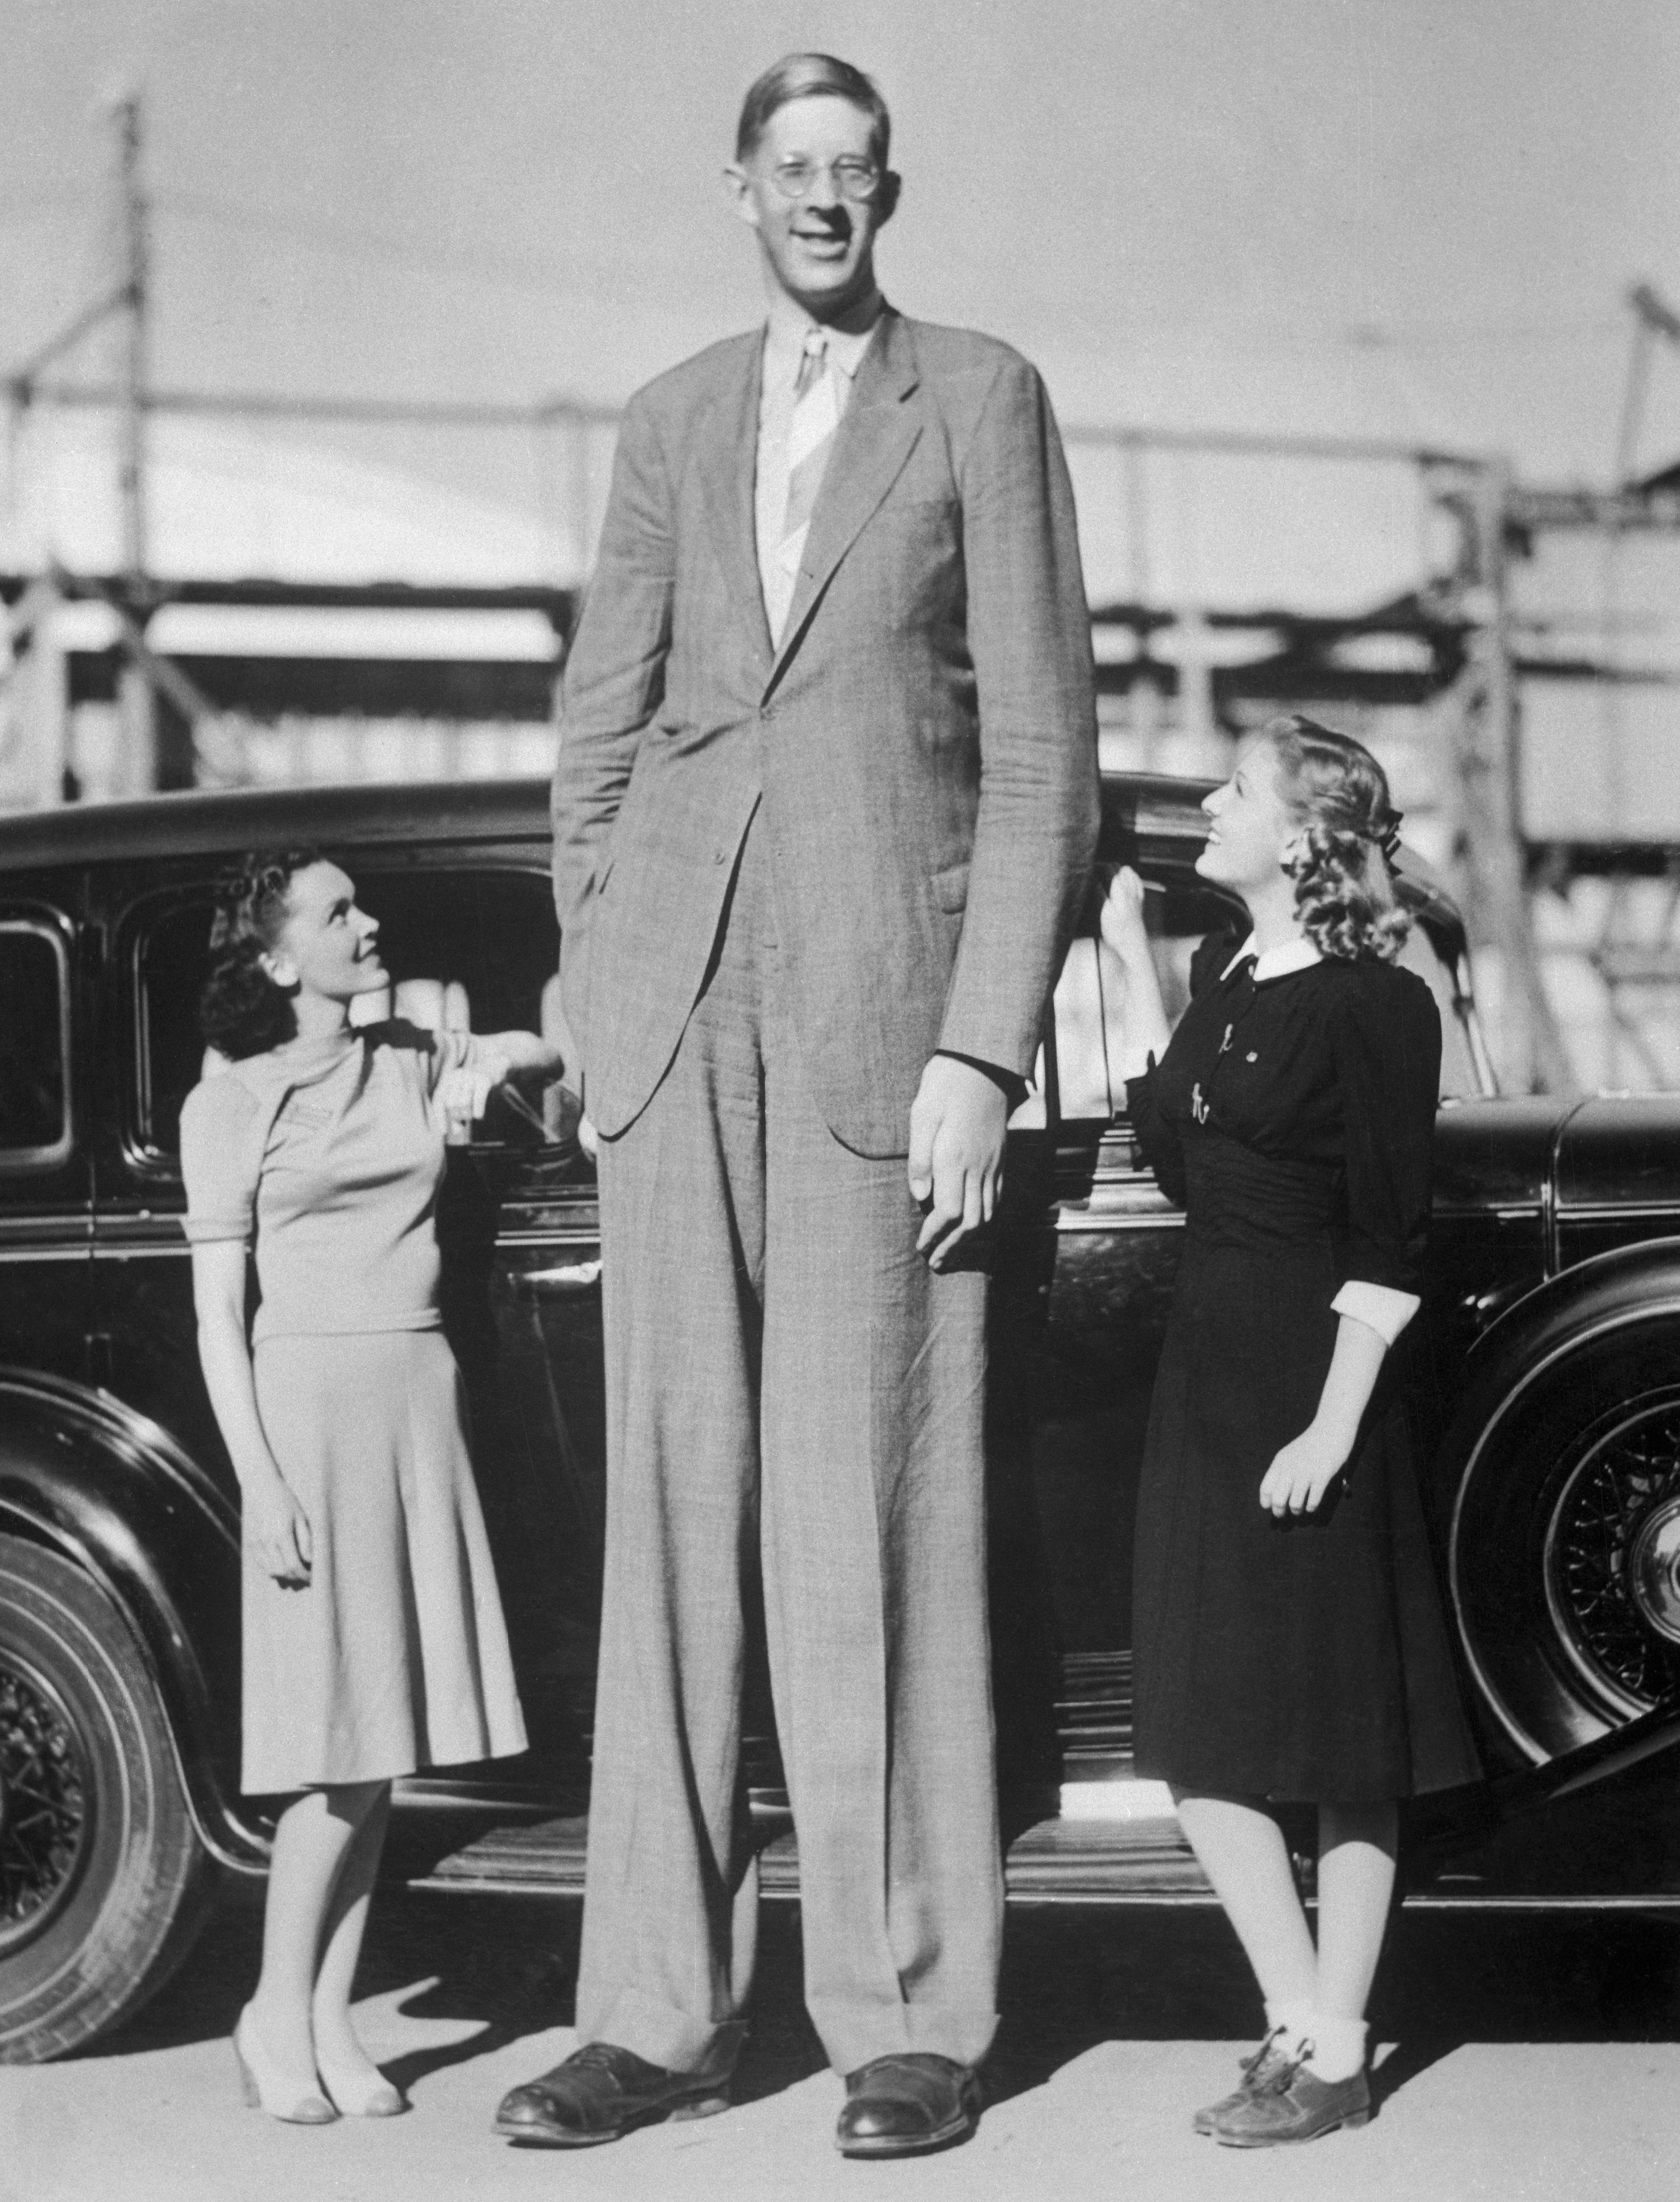 He&#x27;s wearing a suit and standing in front of a car next to two smiling women, one of whom comes to his hip and another to his waist